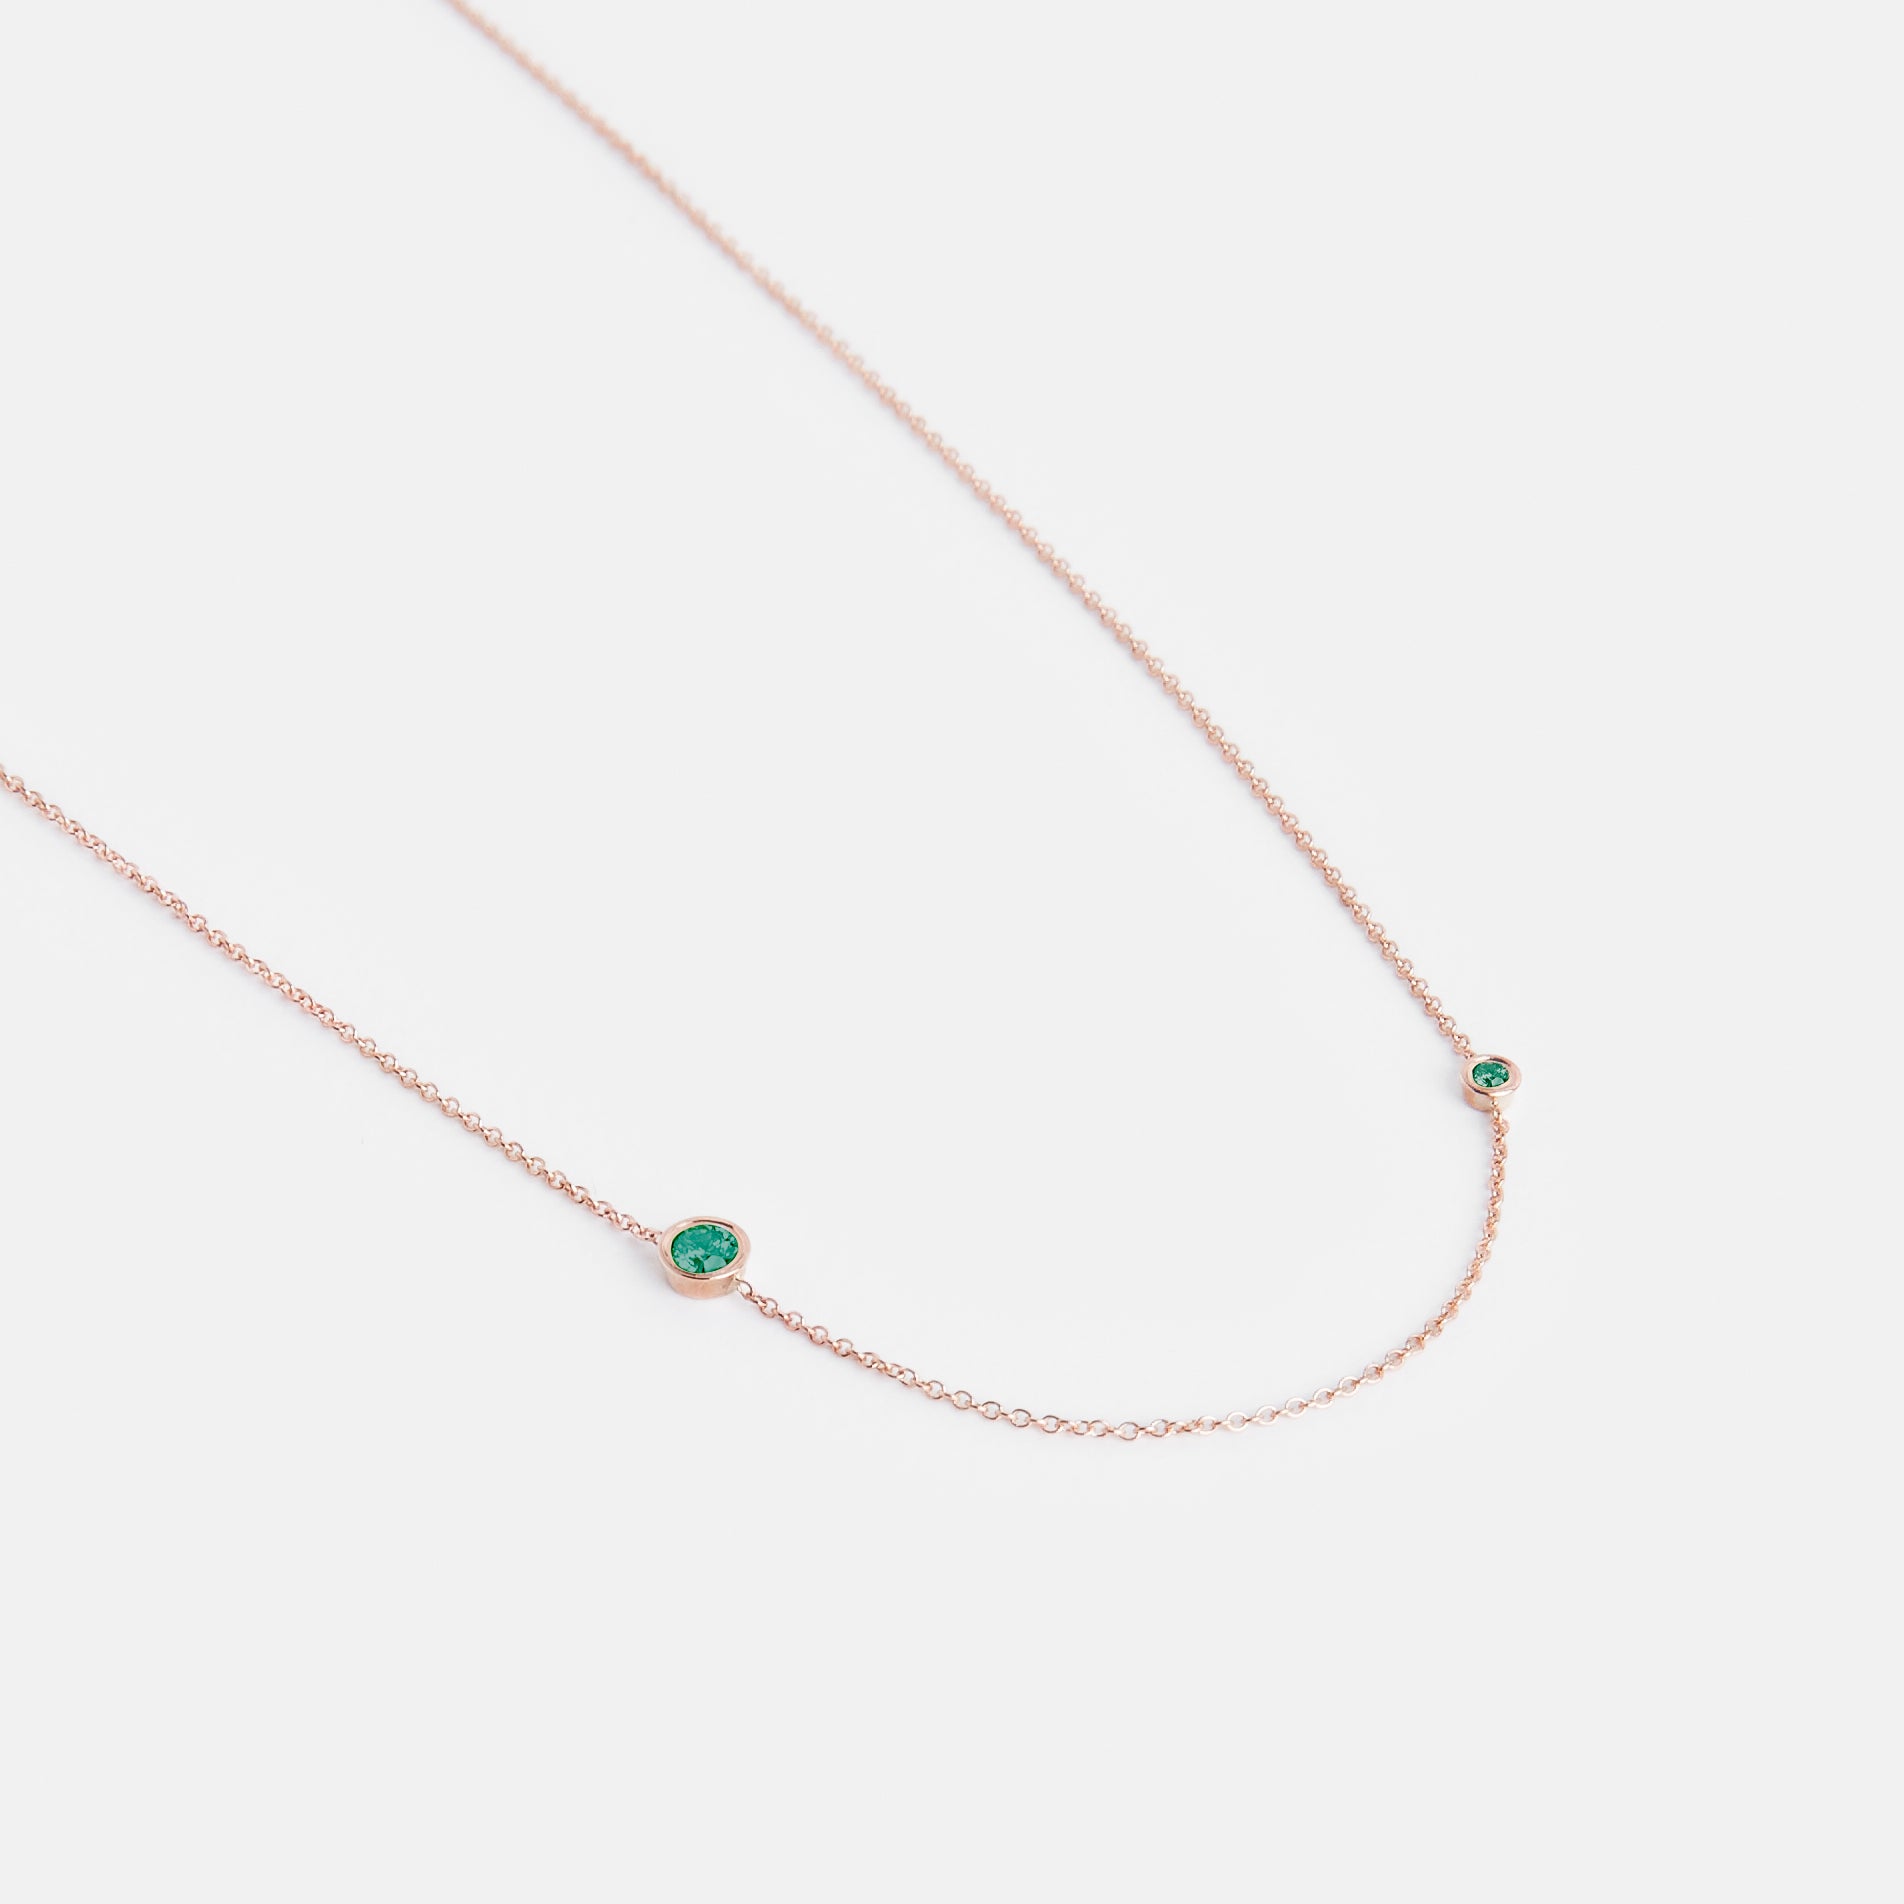 Iba Designer Necklace in 14k Rose Gold set with Emeralds By SHW Fine Jewelry NYC